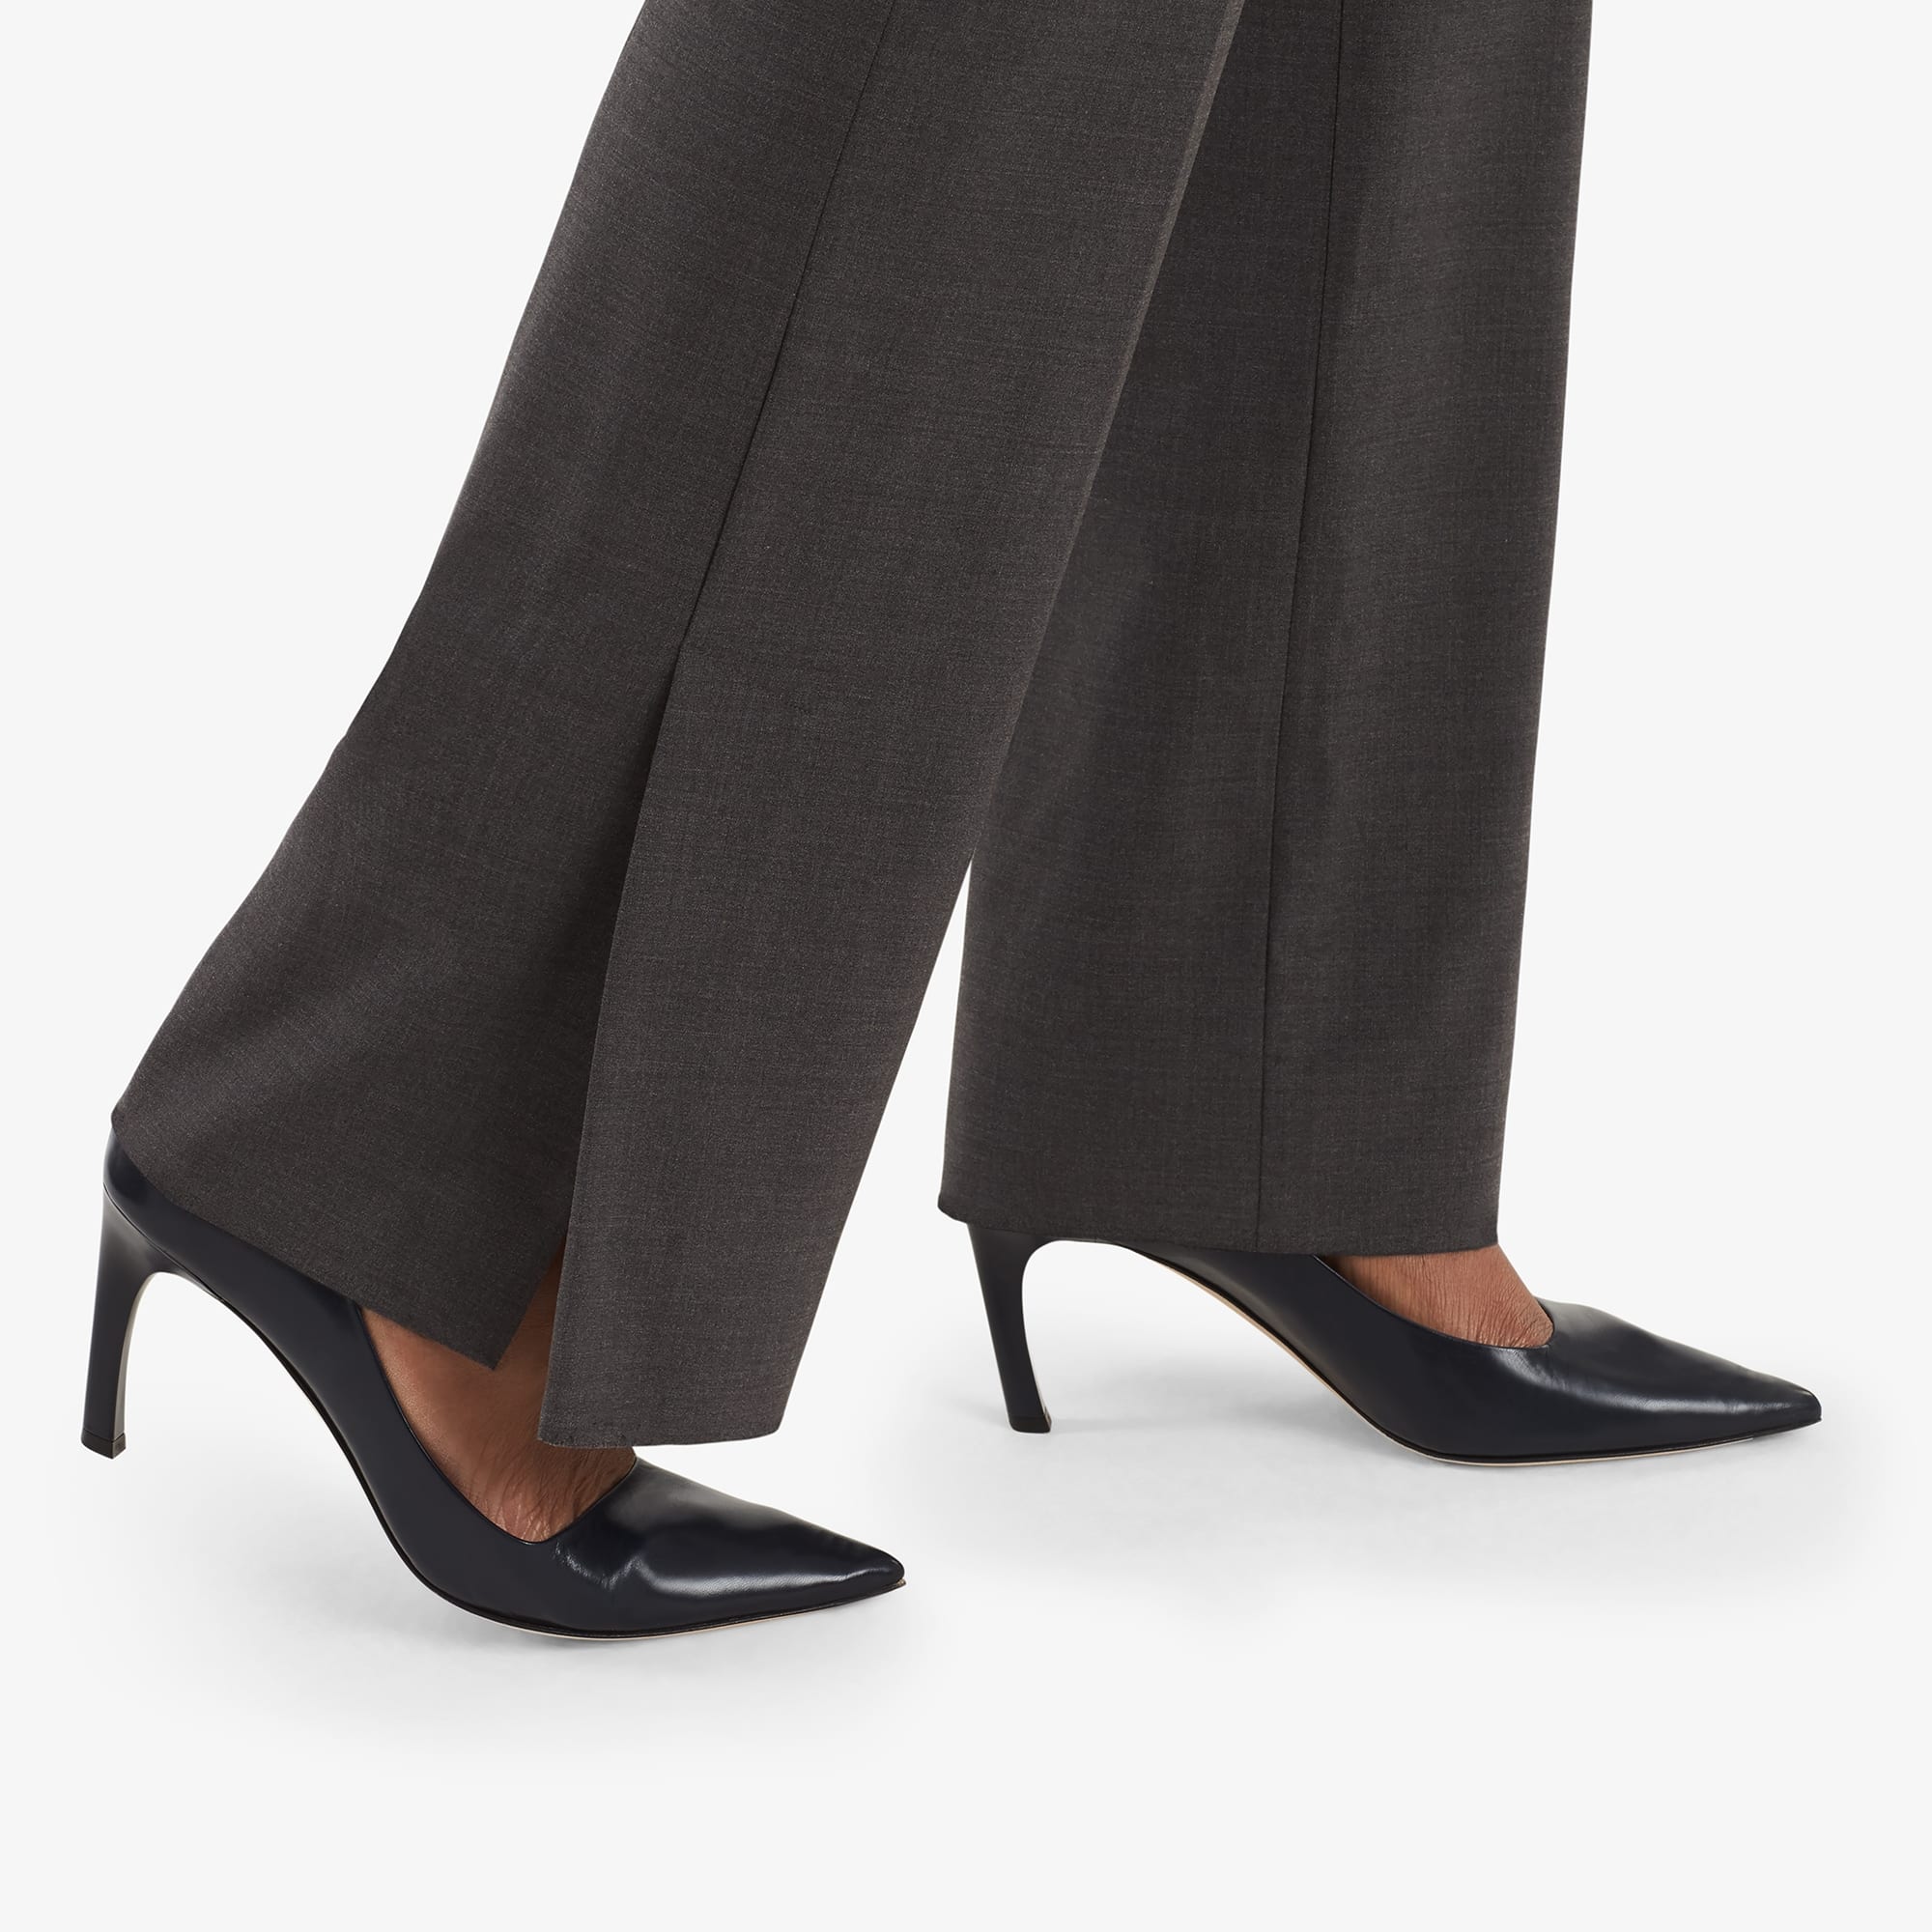 Detail image of the slit at the hem of the Clooney pant in gray melange.